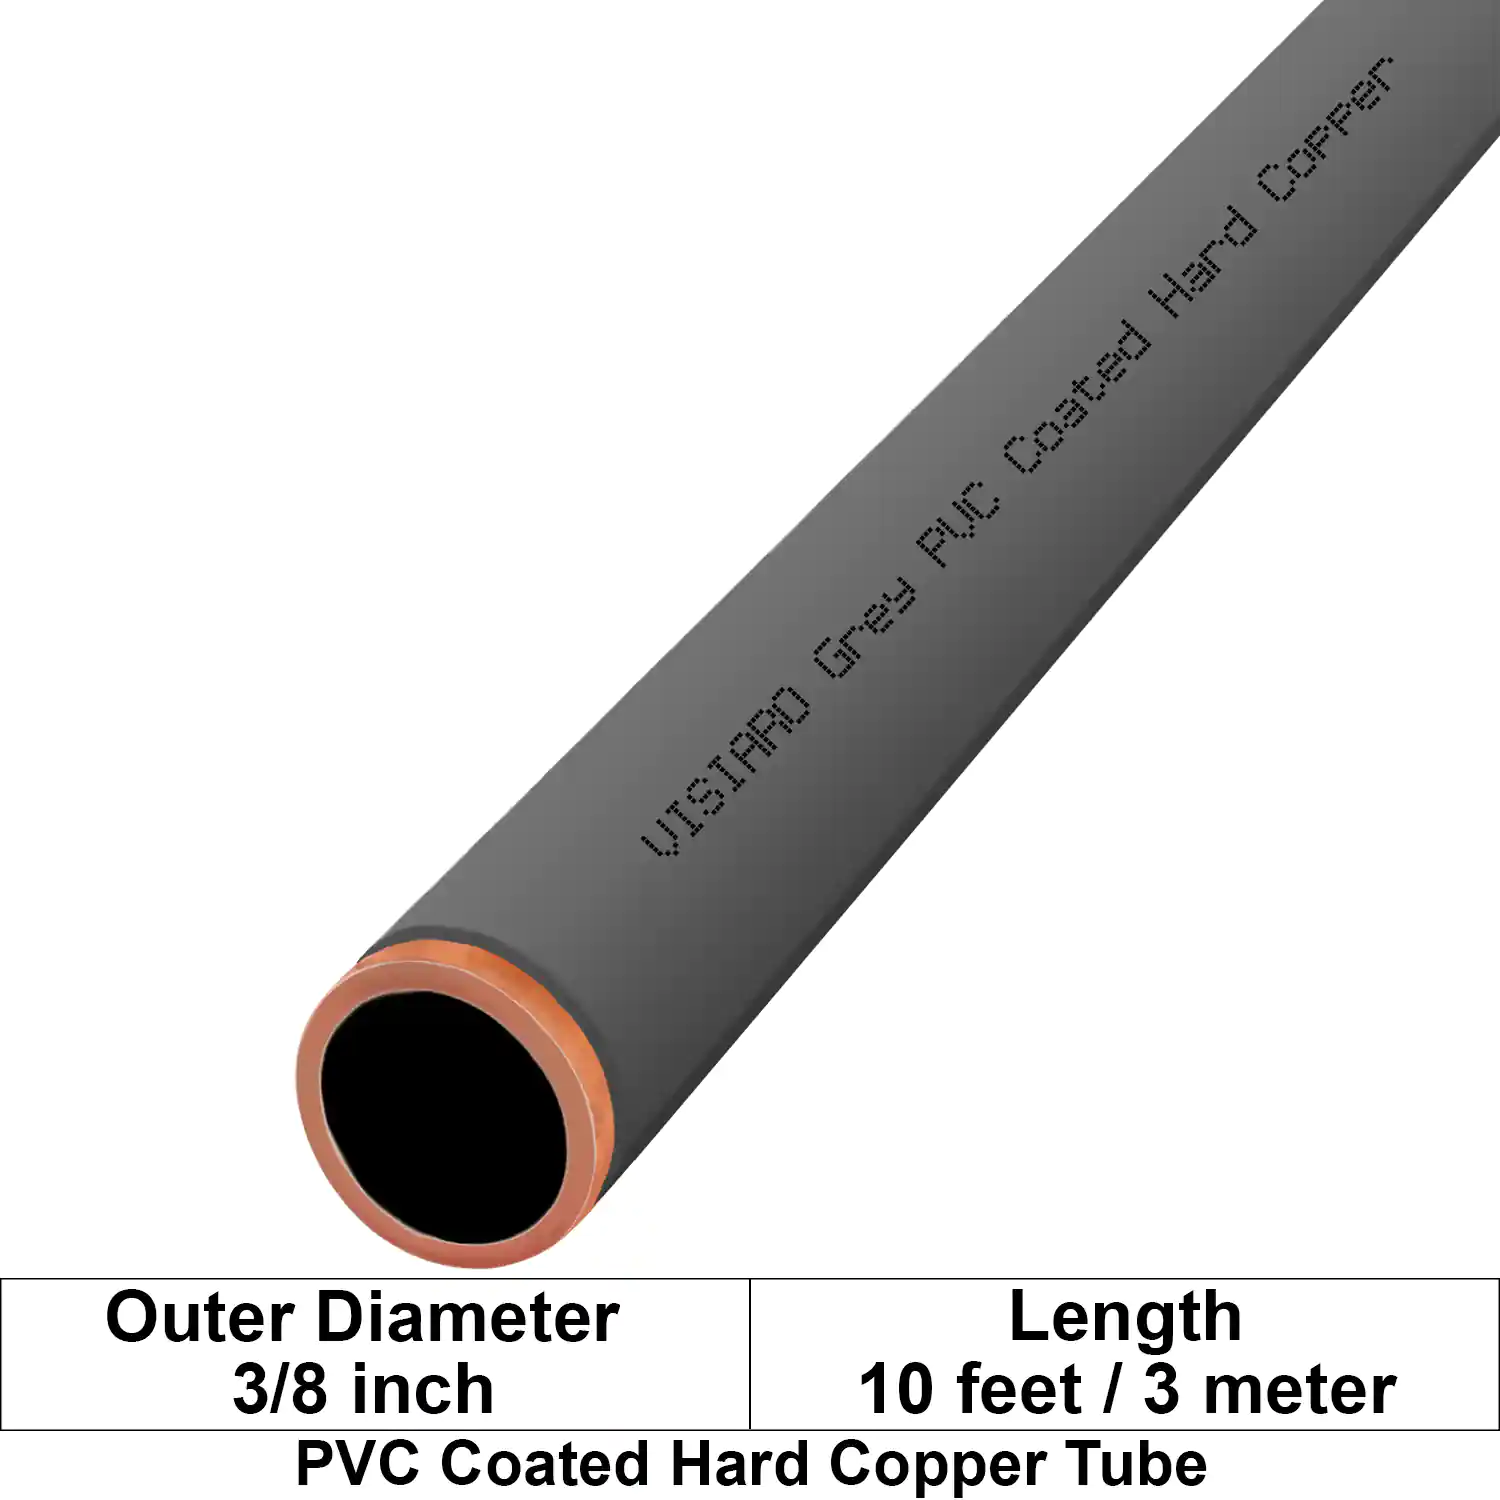 Visiaro Grey PVC Coated Hard Copper Tube 10ft long Outer Diameter - 3/8 inch